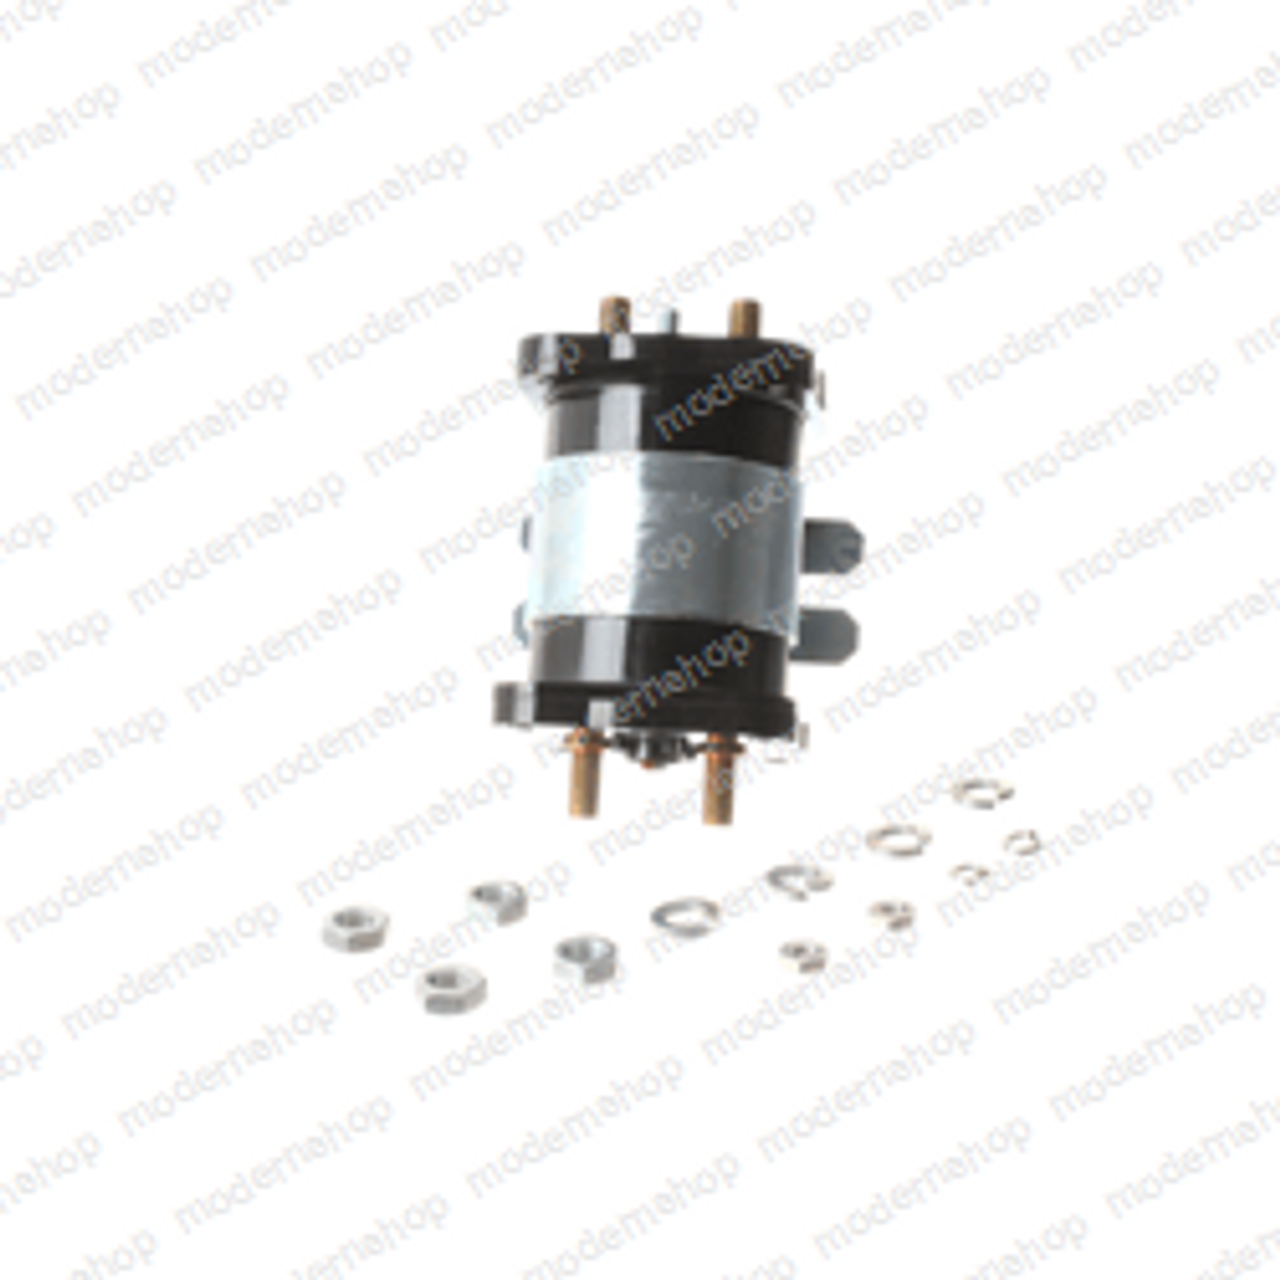 586317111: White Rodgers SOLENOID